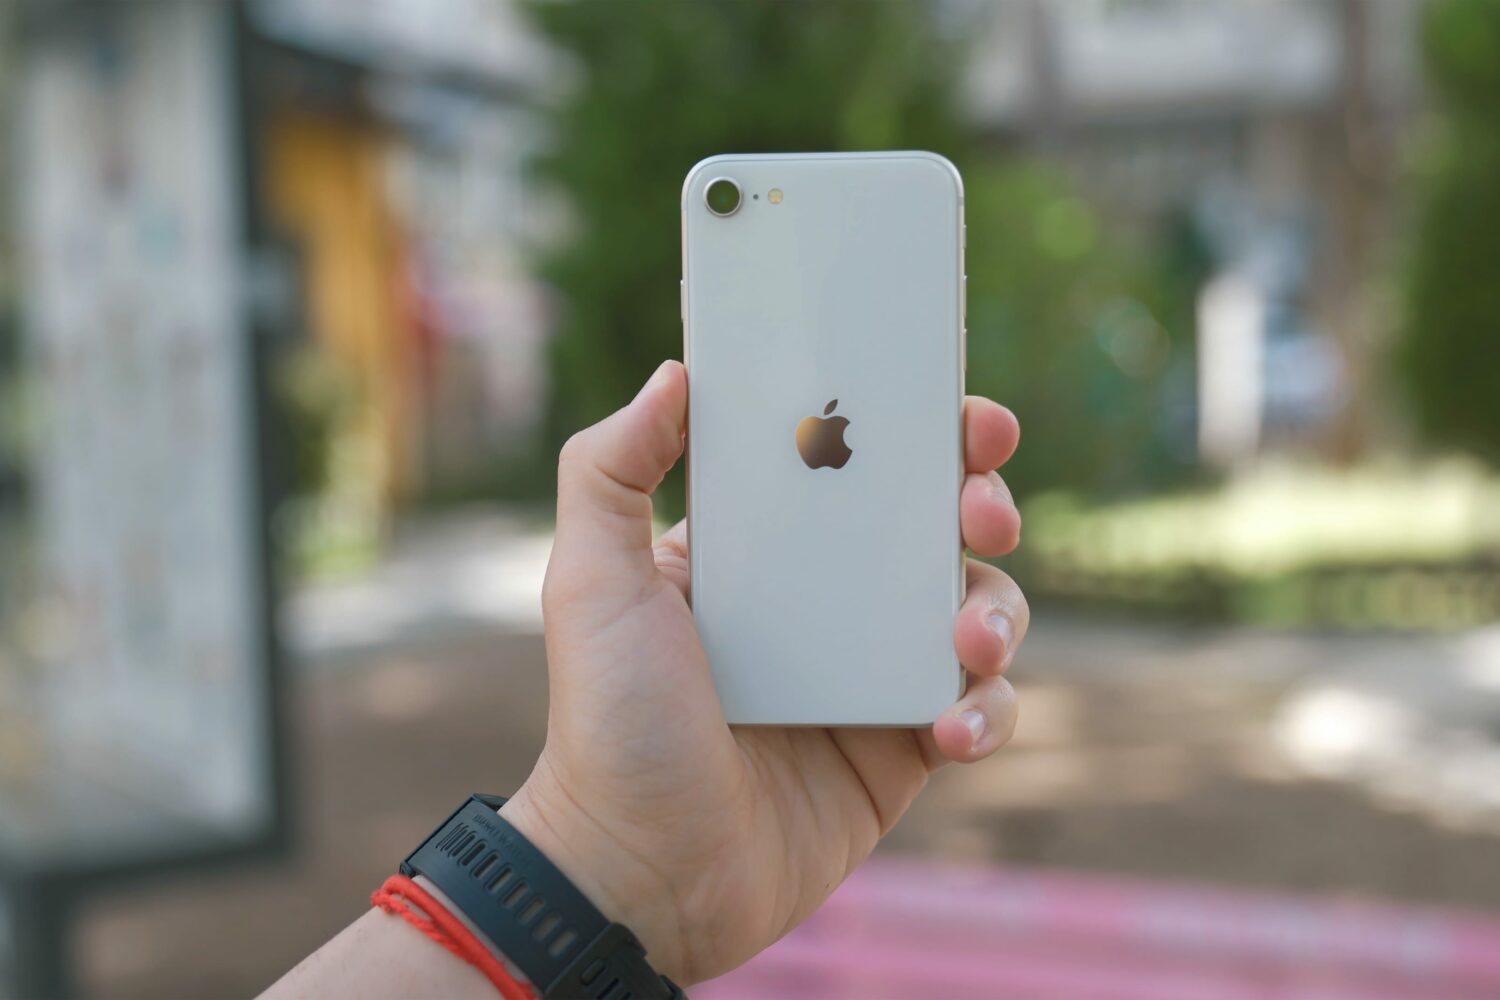 A white third-generation iPhone SE held in hand, showcasing the back of the device